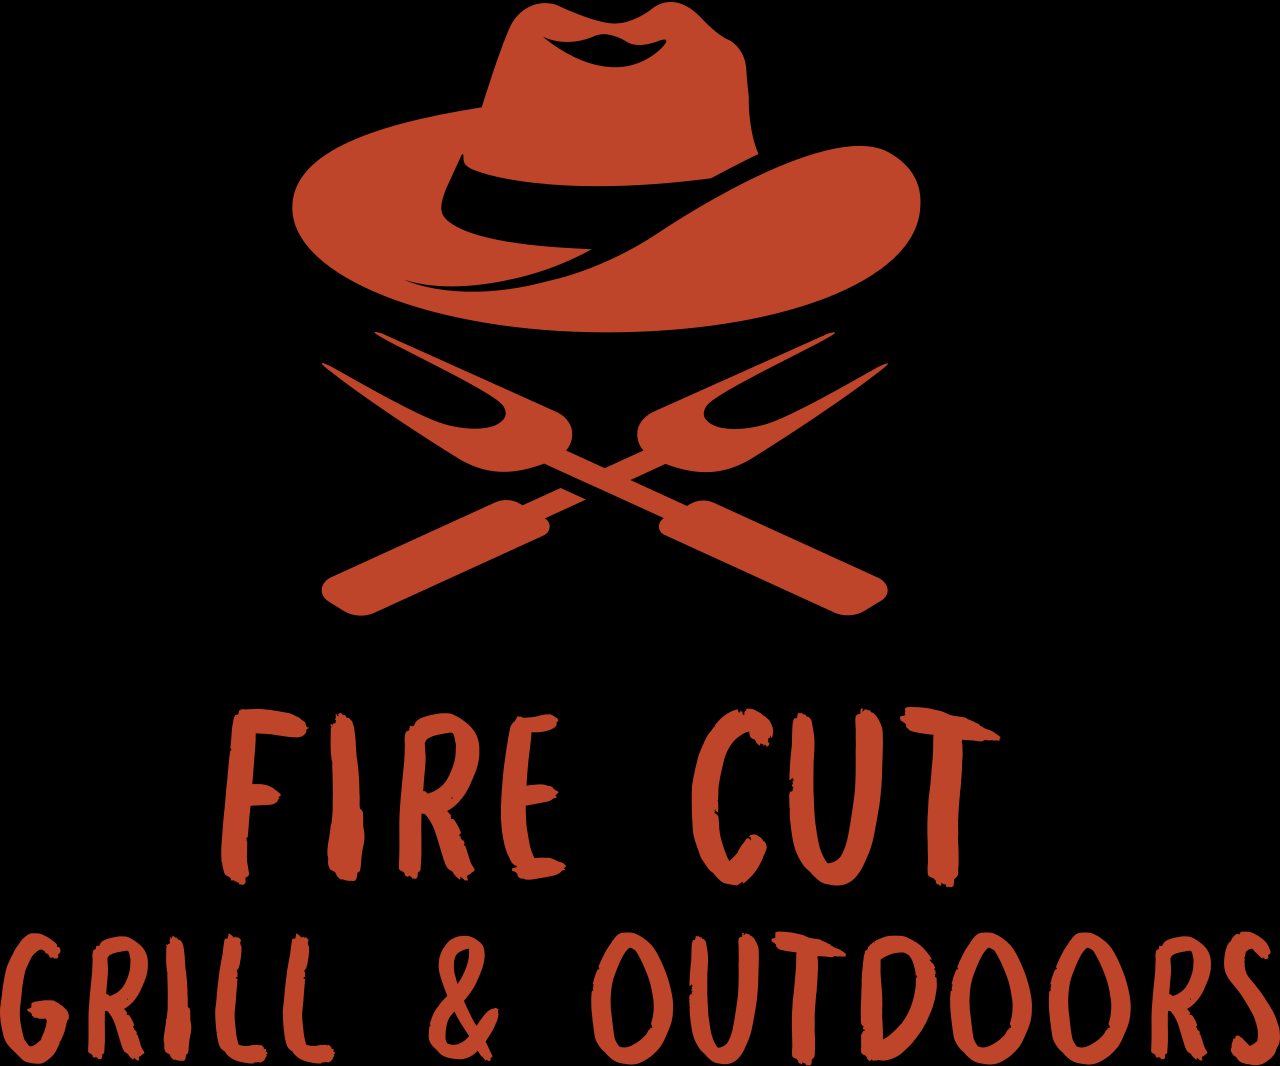 Fire Cut Grill's web page